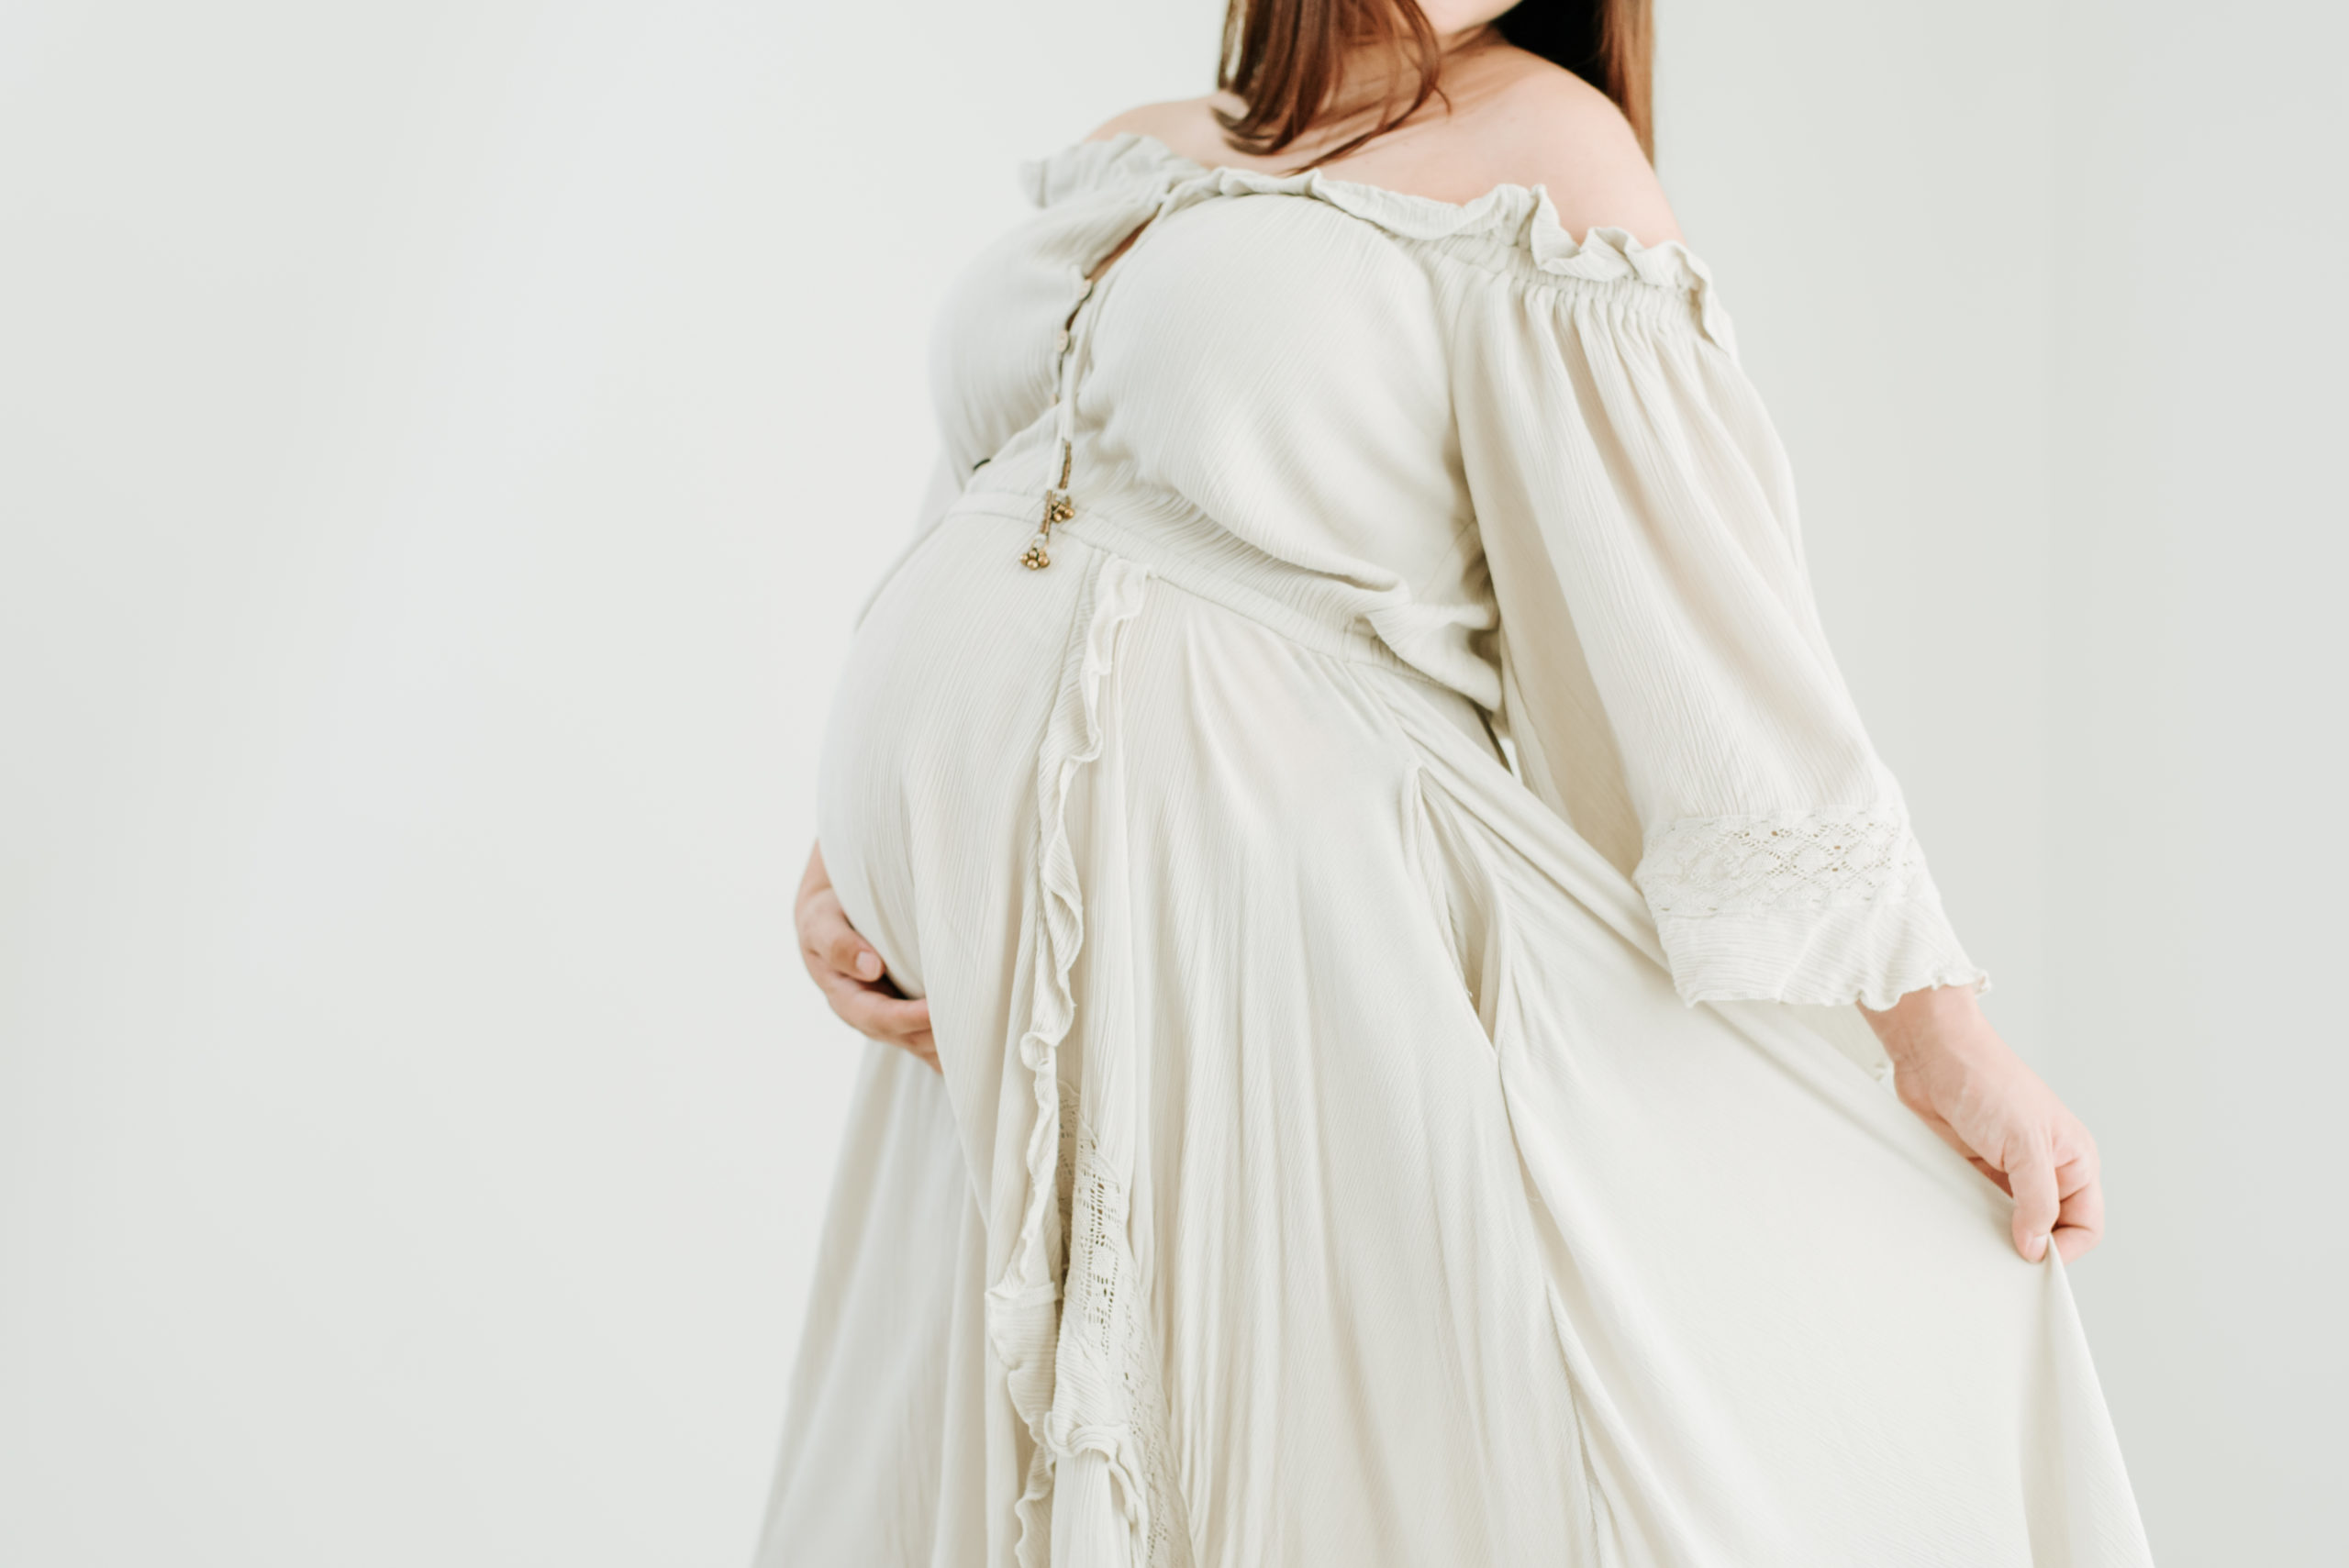 Studio maternity photography has been growing in popularity and very on trend lately.